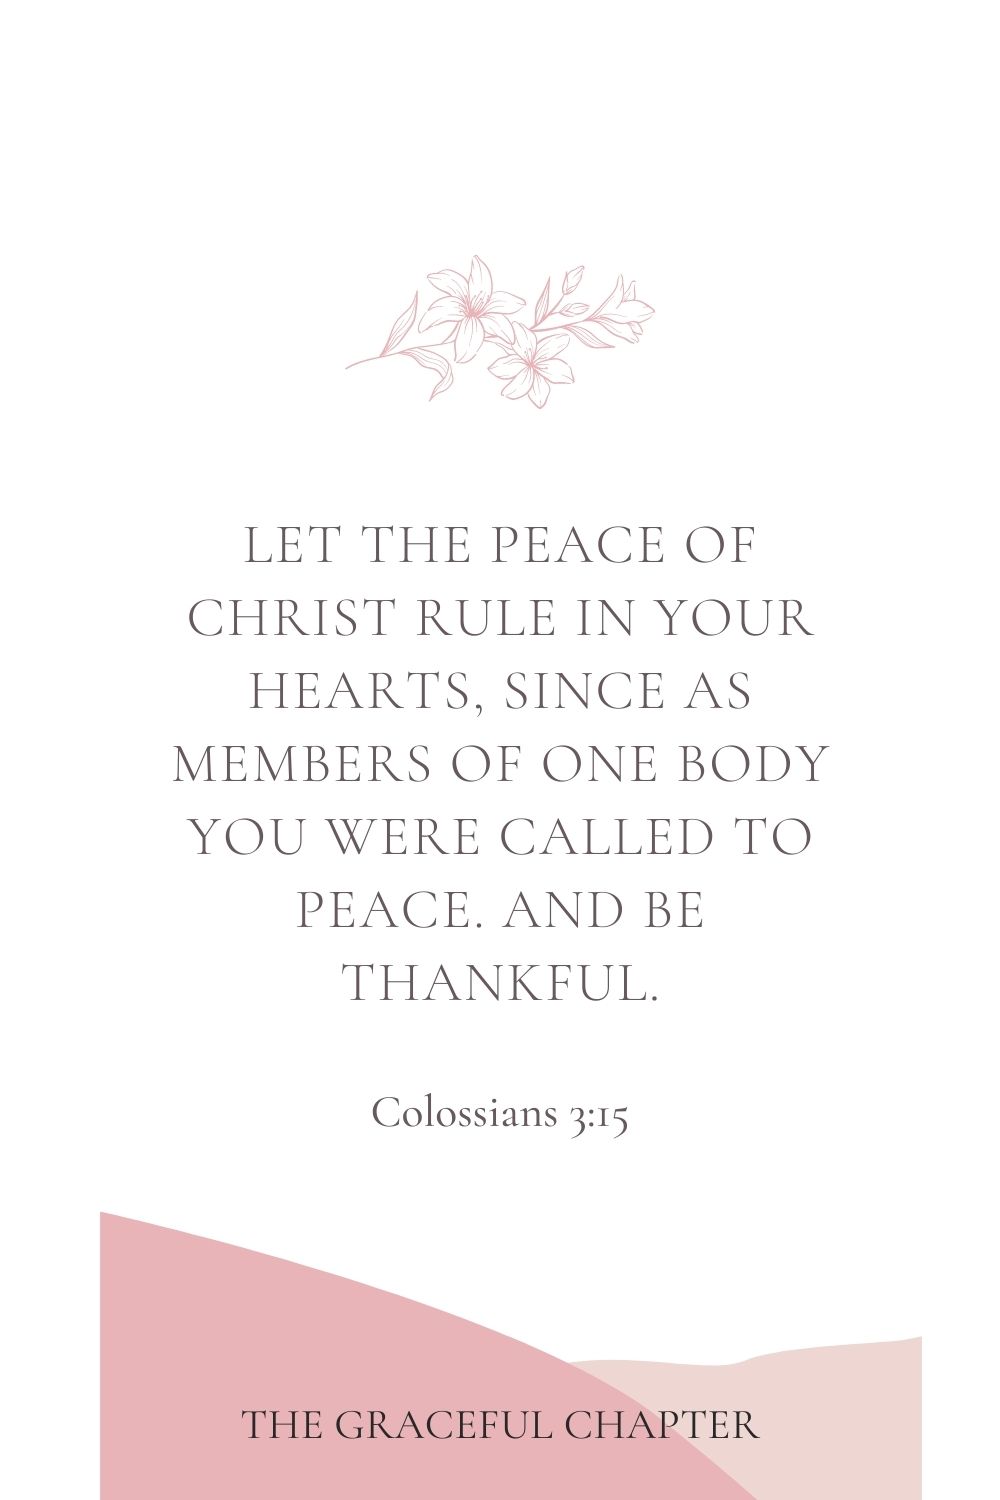 Let the peace of Christ rule in your hearts, since as members of one body you were called to peace. And be thankful. Colossians 3:15